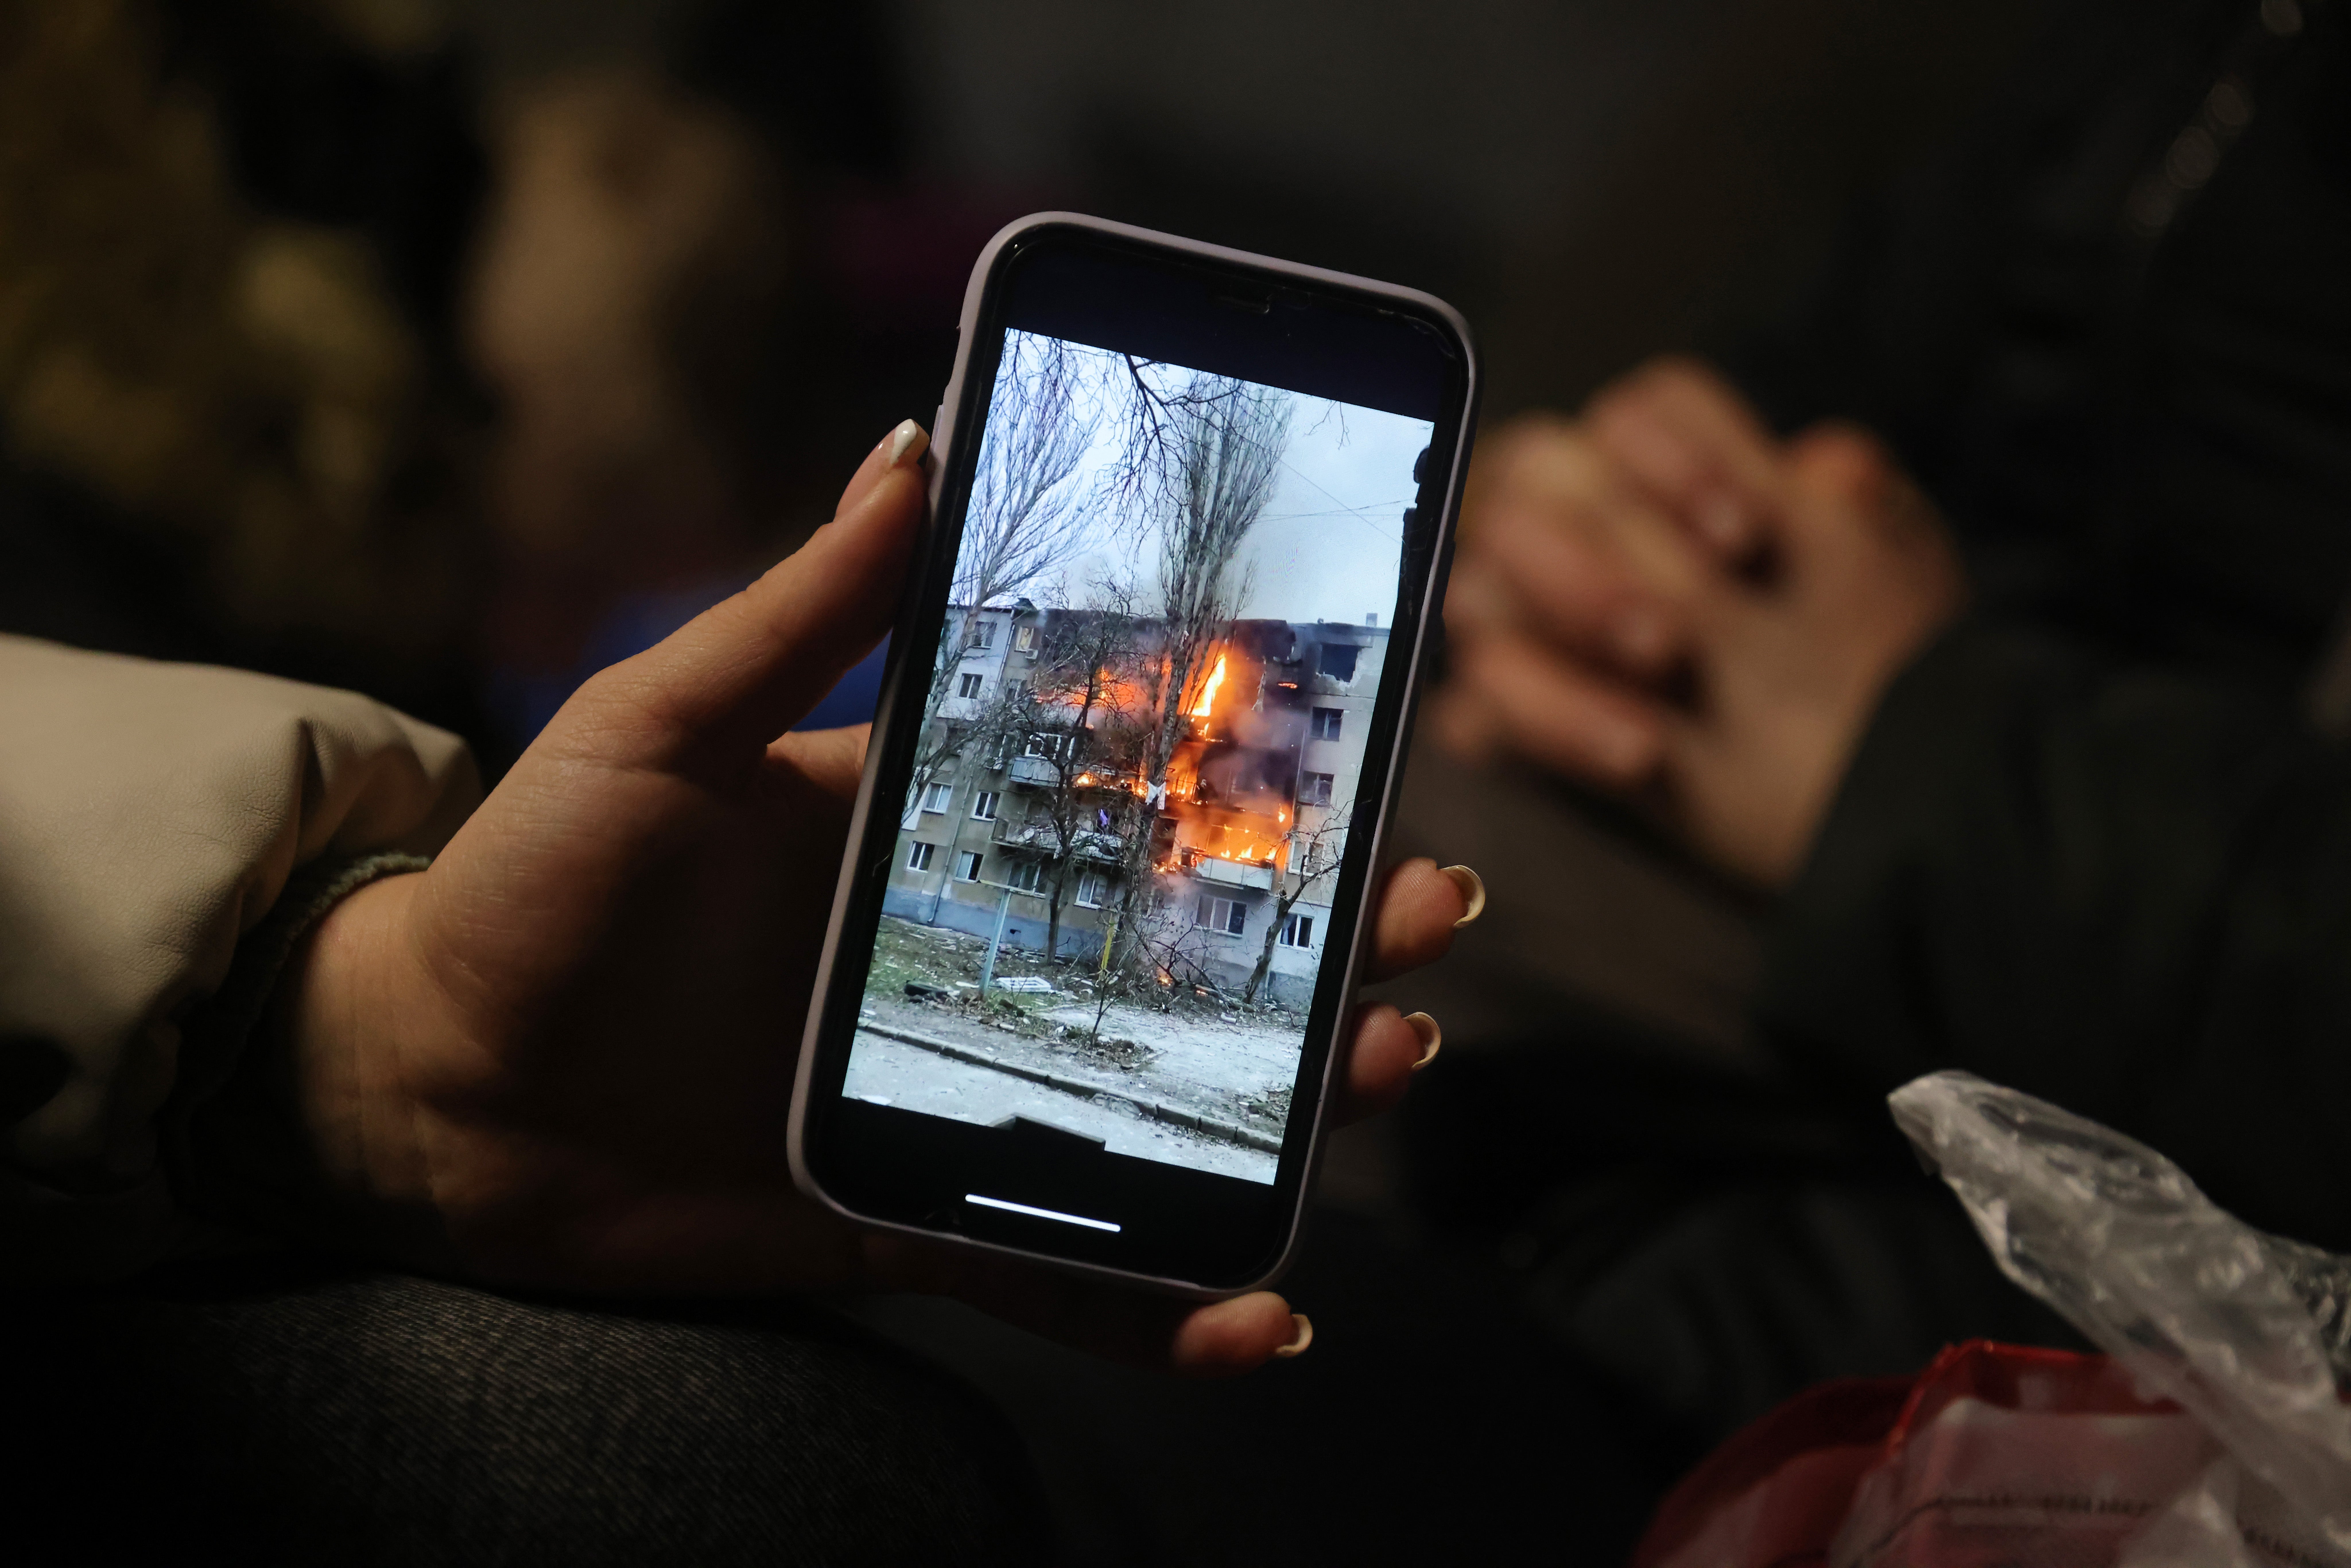 Iryna Holoshchapova, a Ukrainian refugee who fled the embattled city of Mykolaiv to Medyka in Poland, shows a video on her smartphone of an apartment block in Mykolaiv on fire following a Russian attack, 9 March 2022